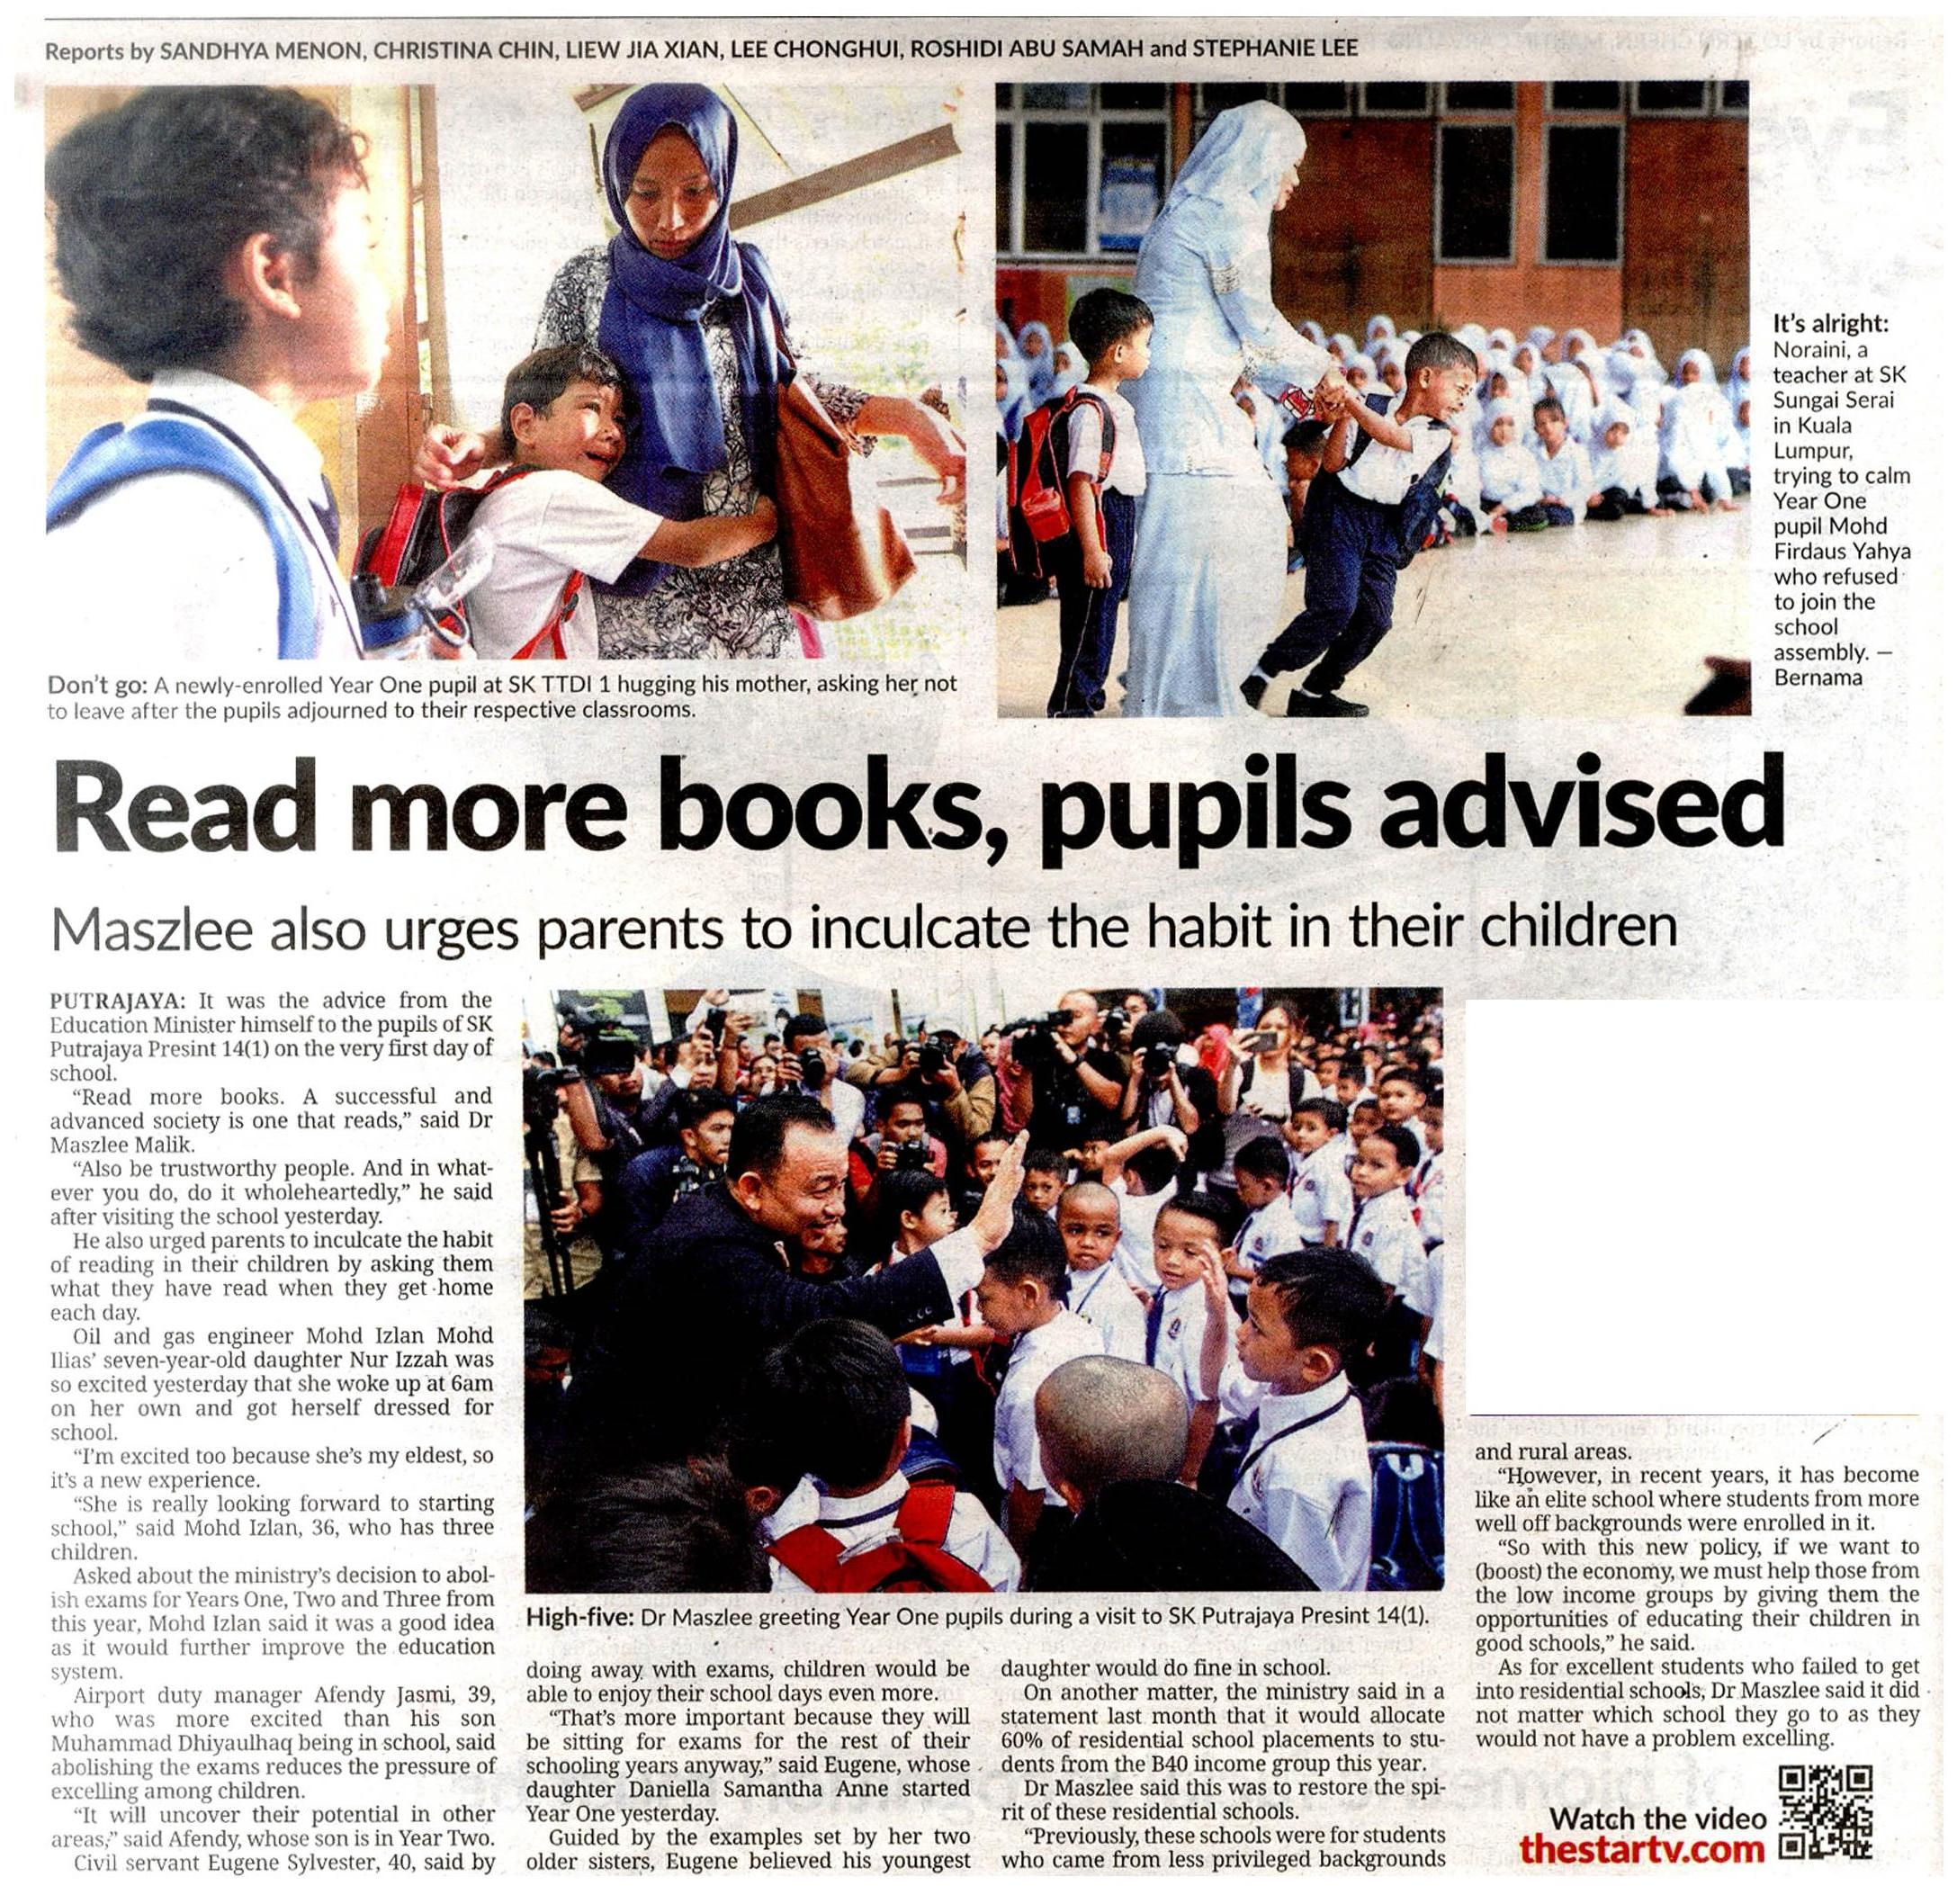 Read more books pupils adviced